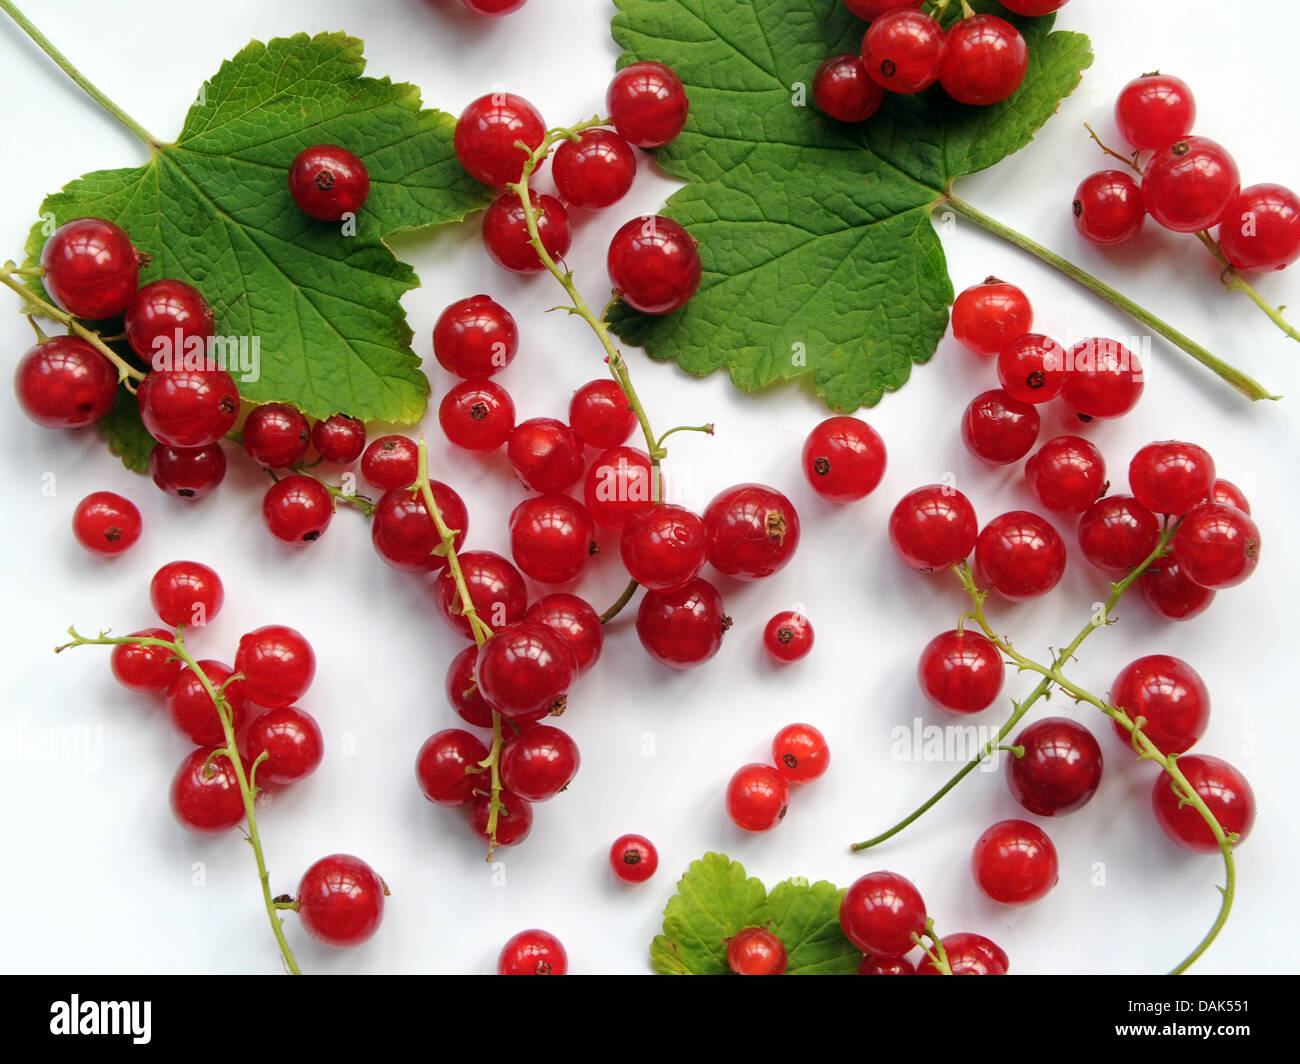 Redcurrant berries and leaves. Stock Photo